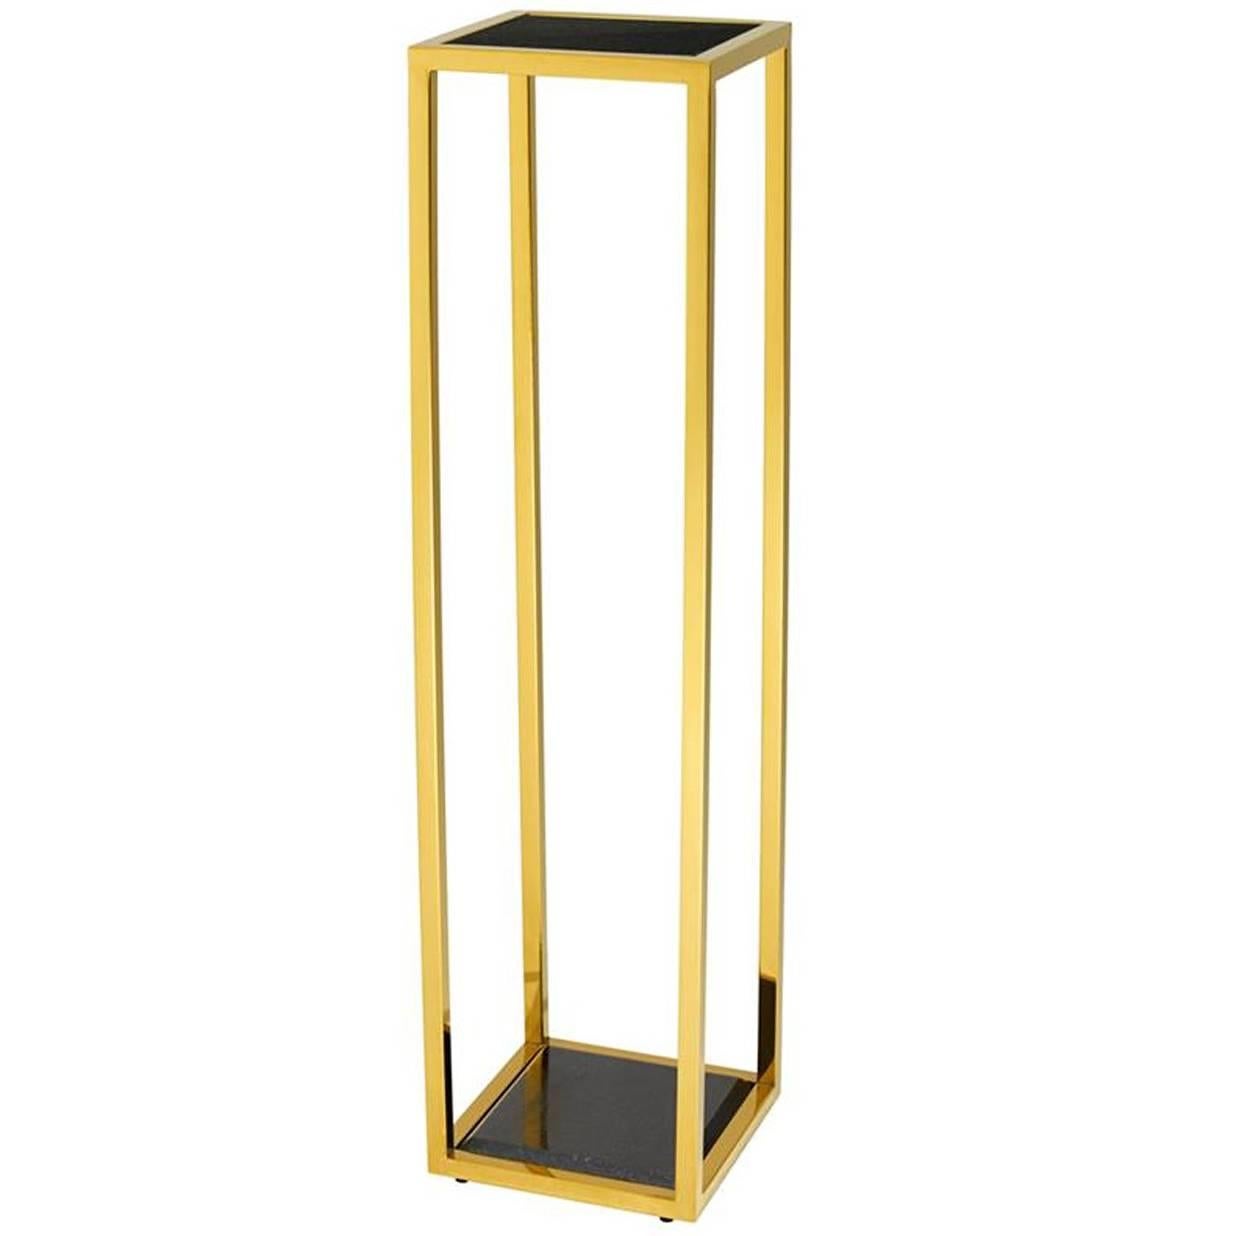 Orphy Colomn in Gold Finish or Polished Stainless Steel with Black Marble